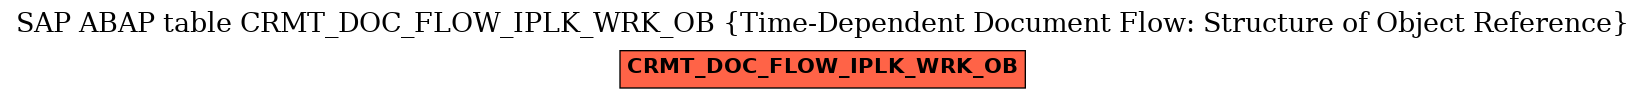 E-R Diagram for table CRMT_DOC_FLOW_IPLK_WRK_OB (Time-Dependent Document Flow: Structure of Object Reference)